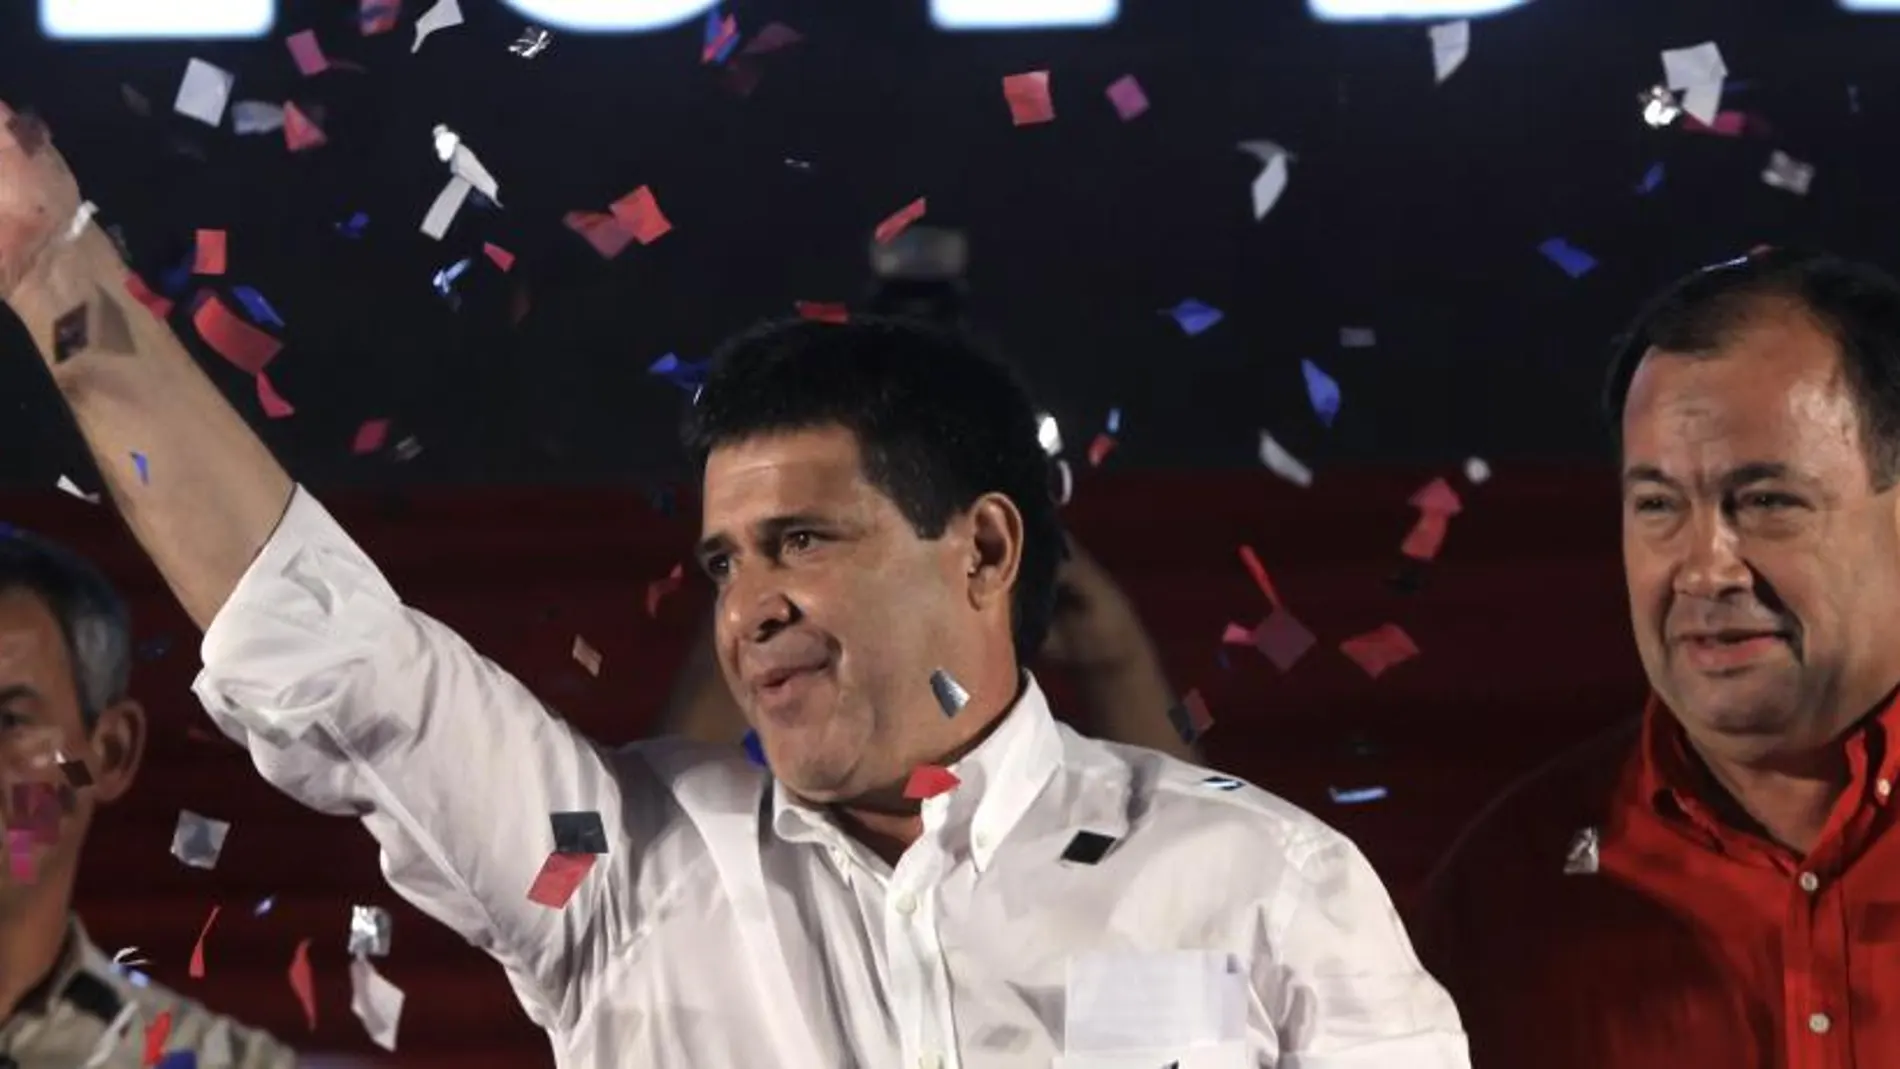 Colorado Party's presidential candidate Horacio Cartes, waves to supporters in Asuncion, Paraguay, Sunday, April 21, 2013. Cartes won a five-year term with 46 percent of the vote over 37 percent for Efrain Alegre of the Radical Liberal party, the Electoral Court announced after most votes were counted. Five other candidates trailed far behind. At right is Vice-President elect Juan Afara.(AP Photo/Jorge Saenz)